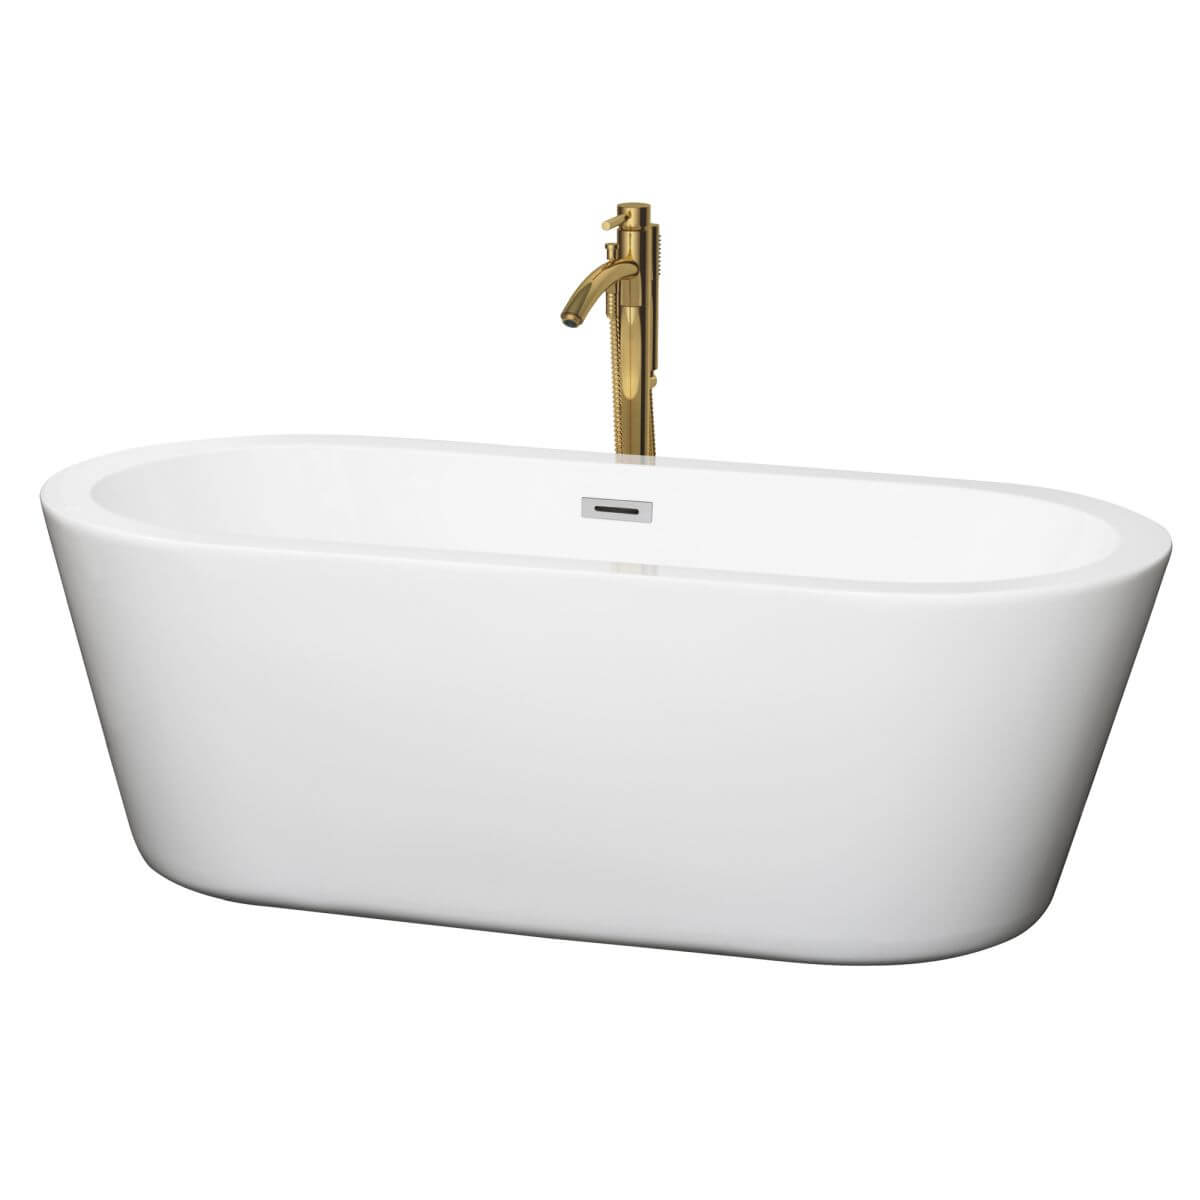 Wyndham Collection Mermaid 67 inch Freestanding Bathtub in White with Polished Chrome Trim and Floor Mounted Faucet in Brushed Gold - WCOBT100367PCATPGD